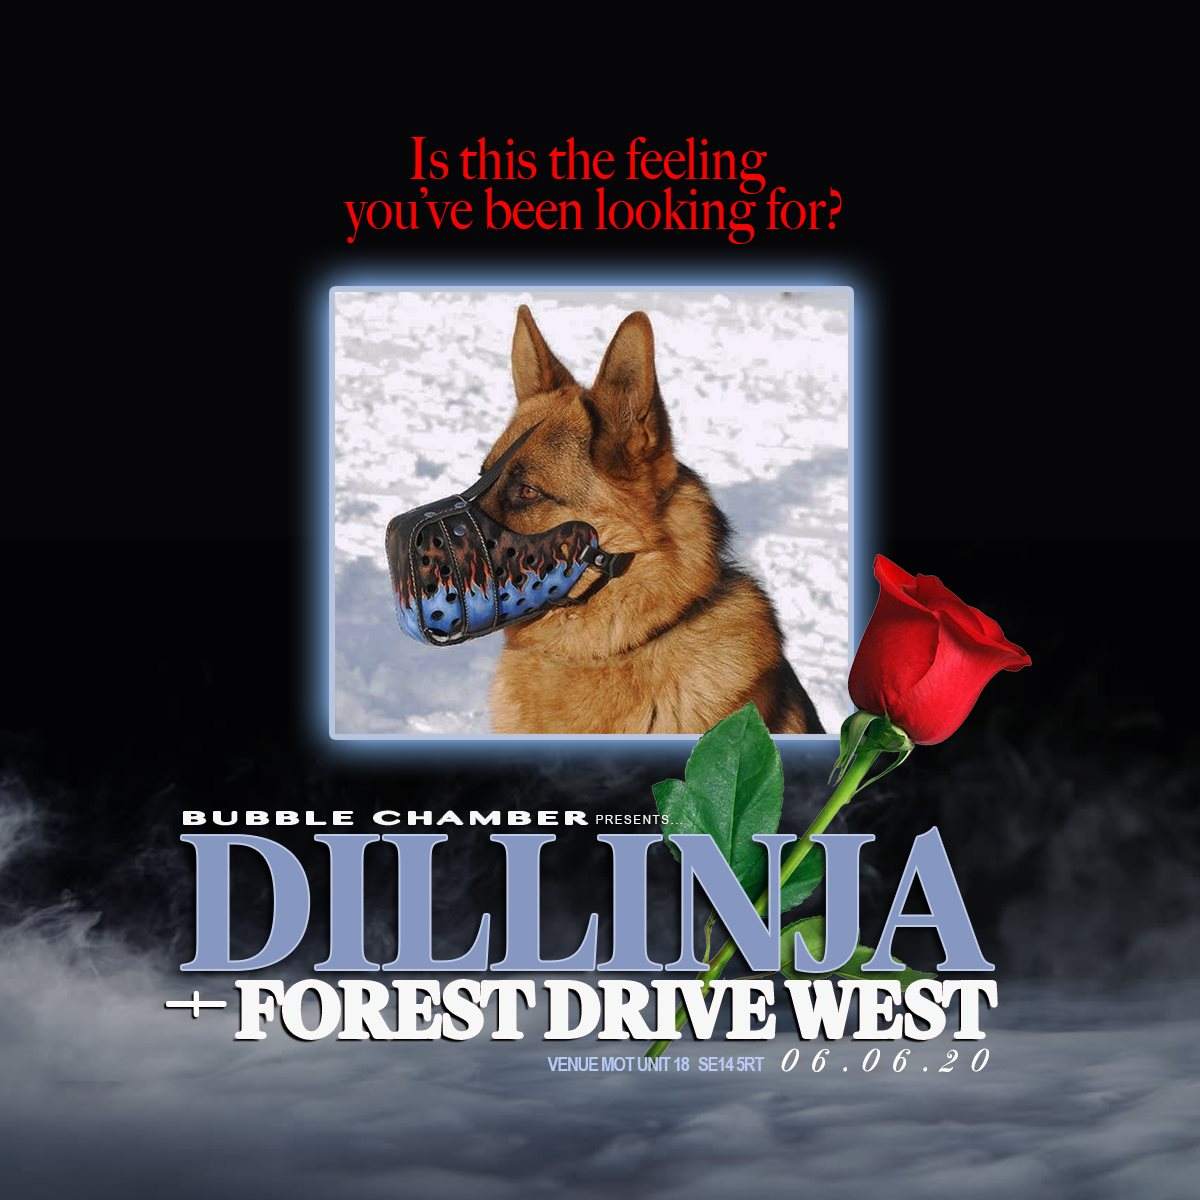 Bubble Chamber: Forest Drive West & Dillinja - Página frontal